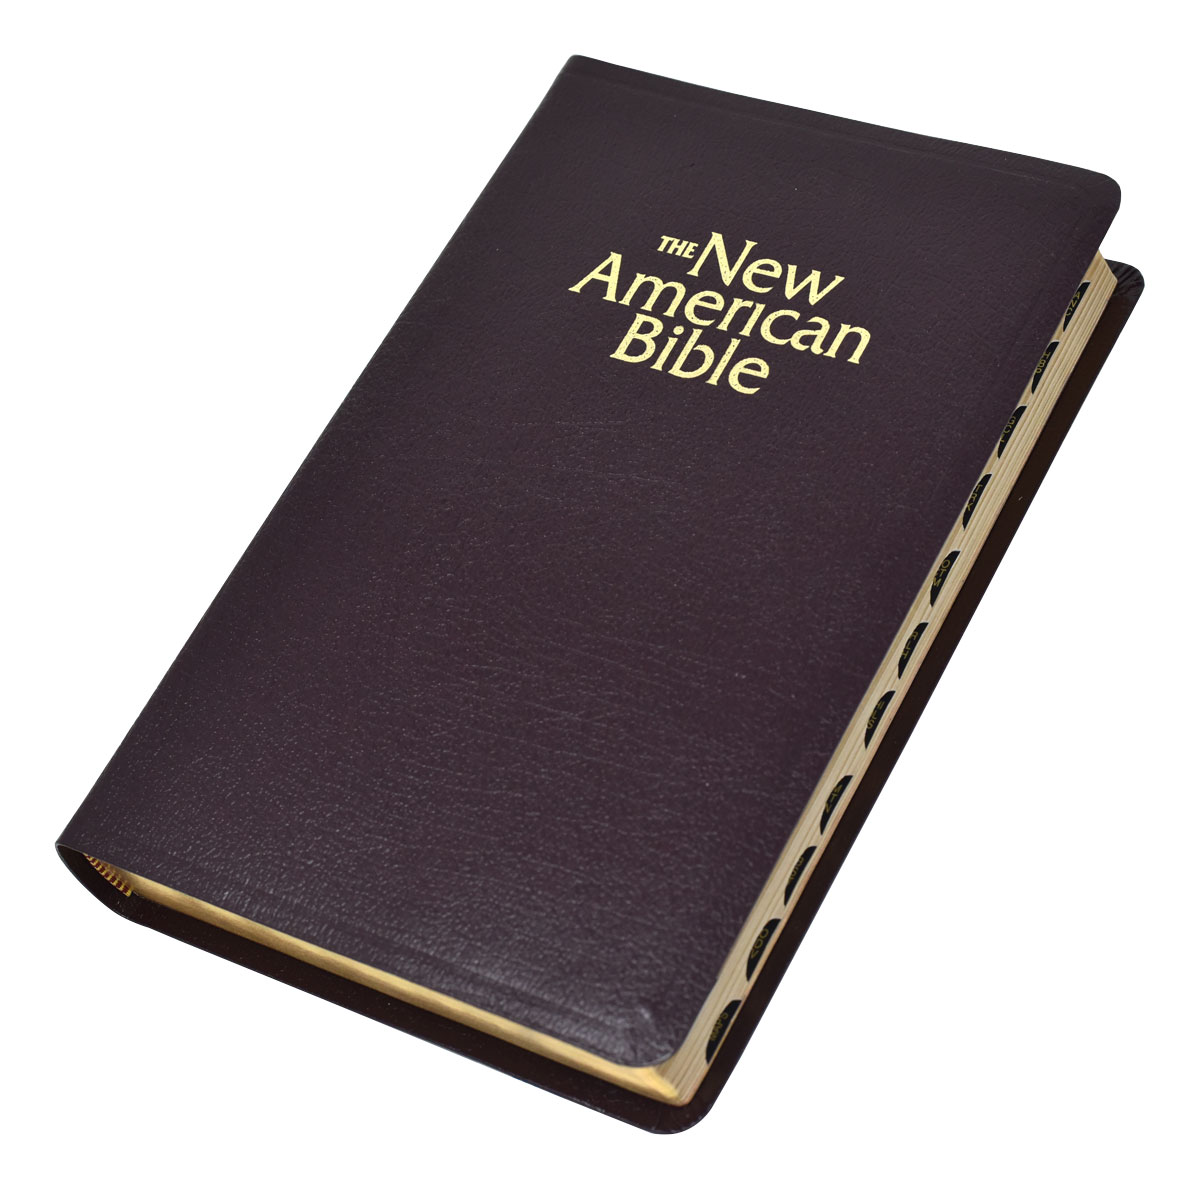 NABRE Deluxe Gift Bible Indexed (Black Bonded Leather)